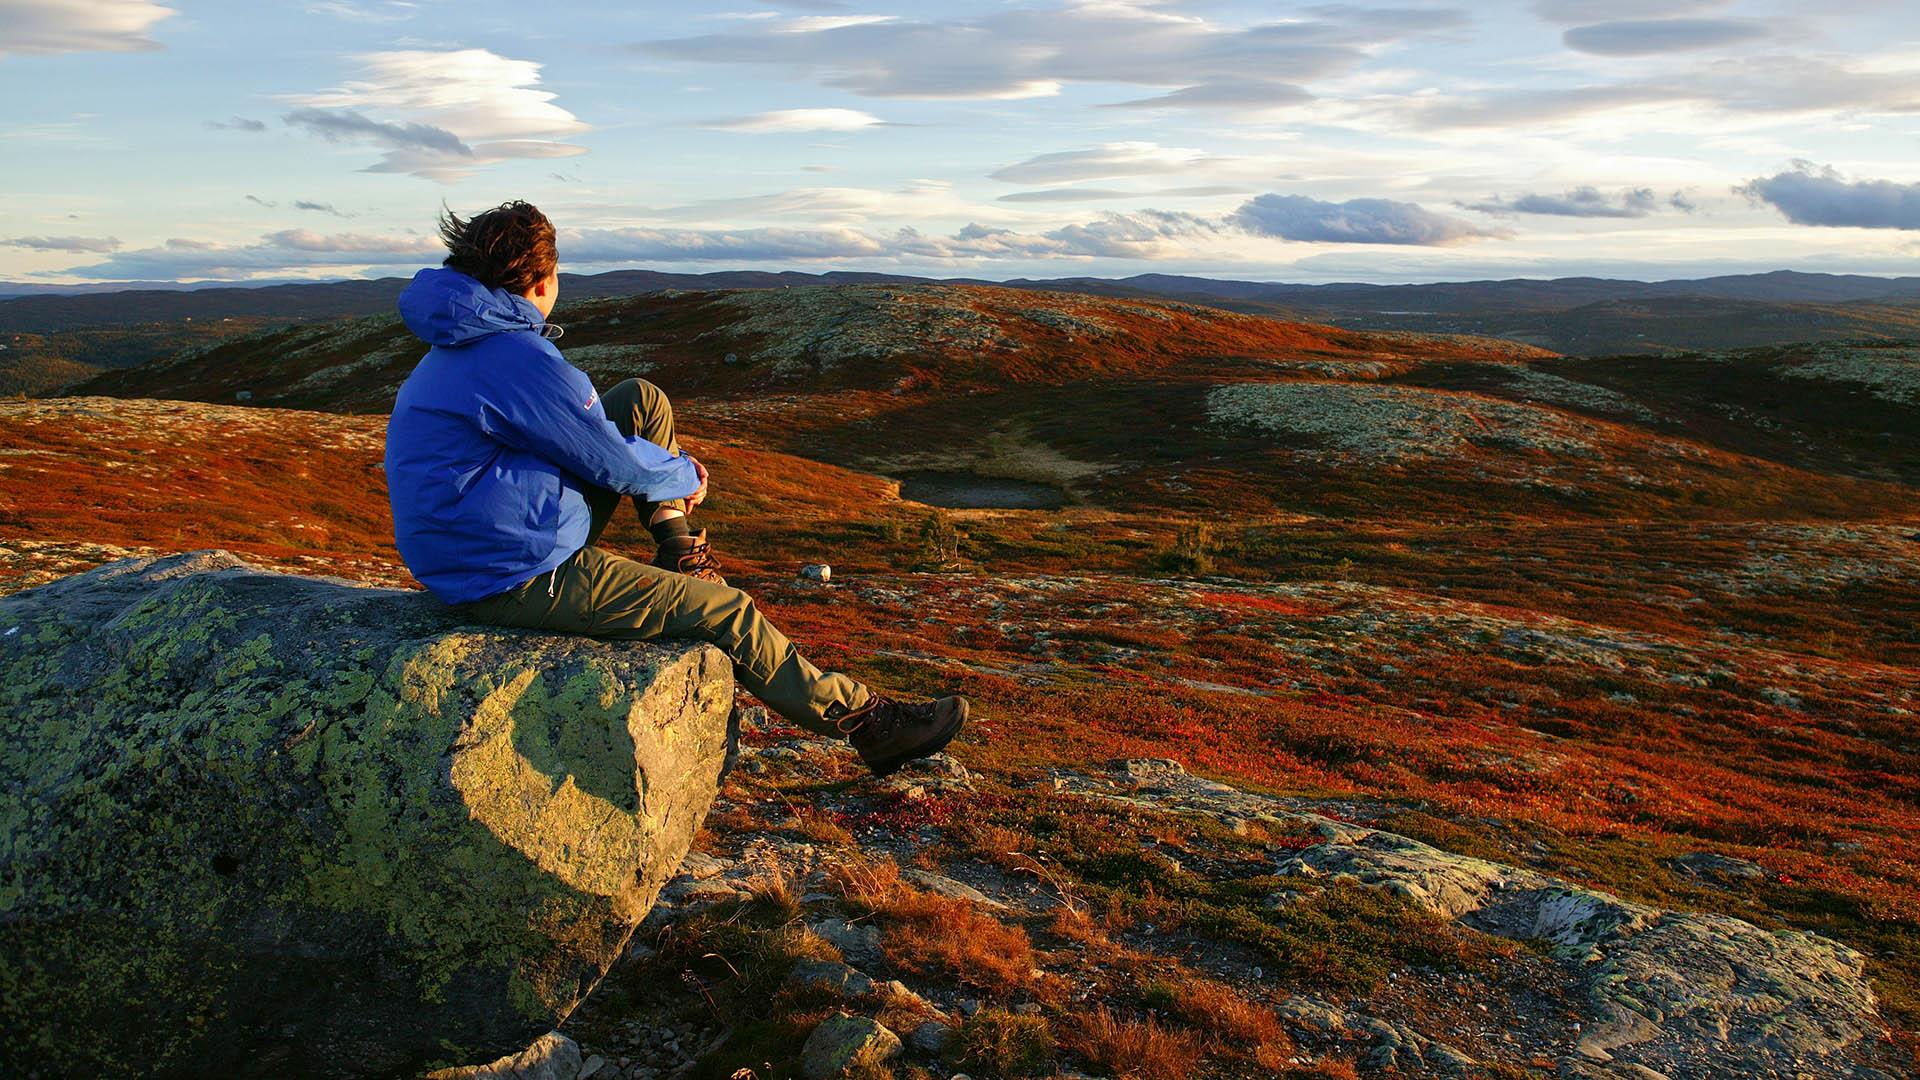 Woman sitting on a rock on top of a mountain a autumn day. Red colored vegetation on the plains in the background.